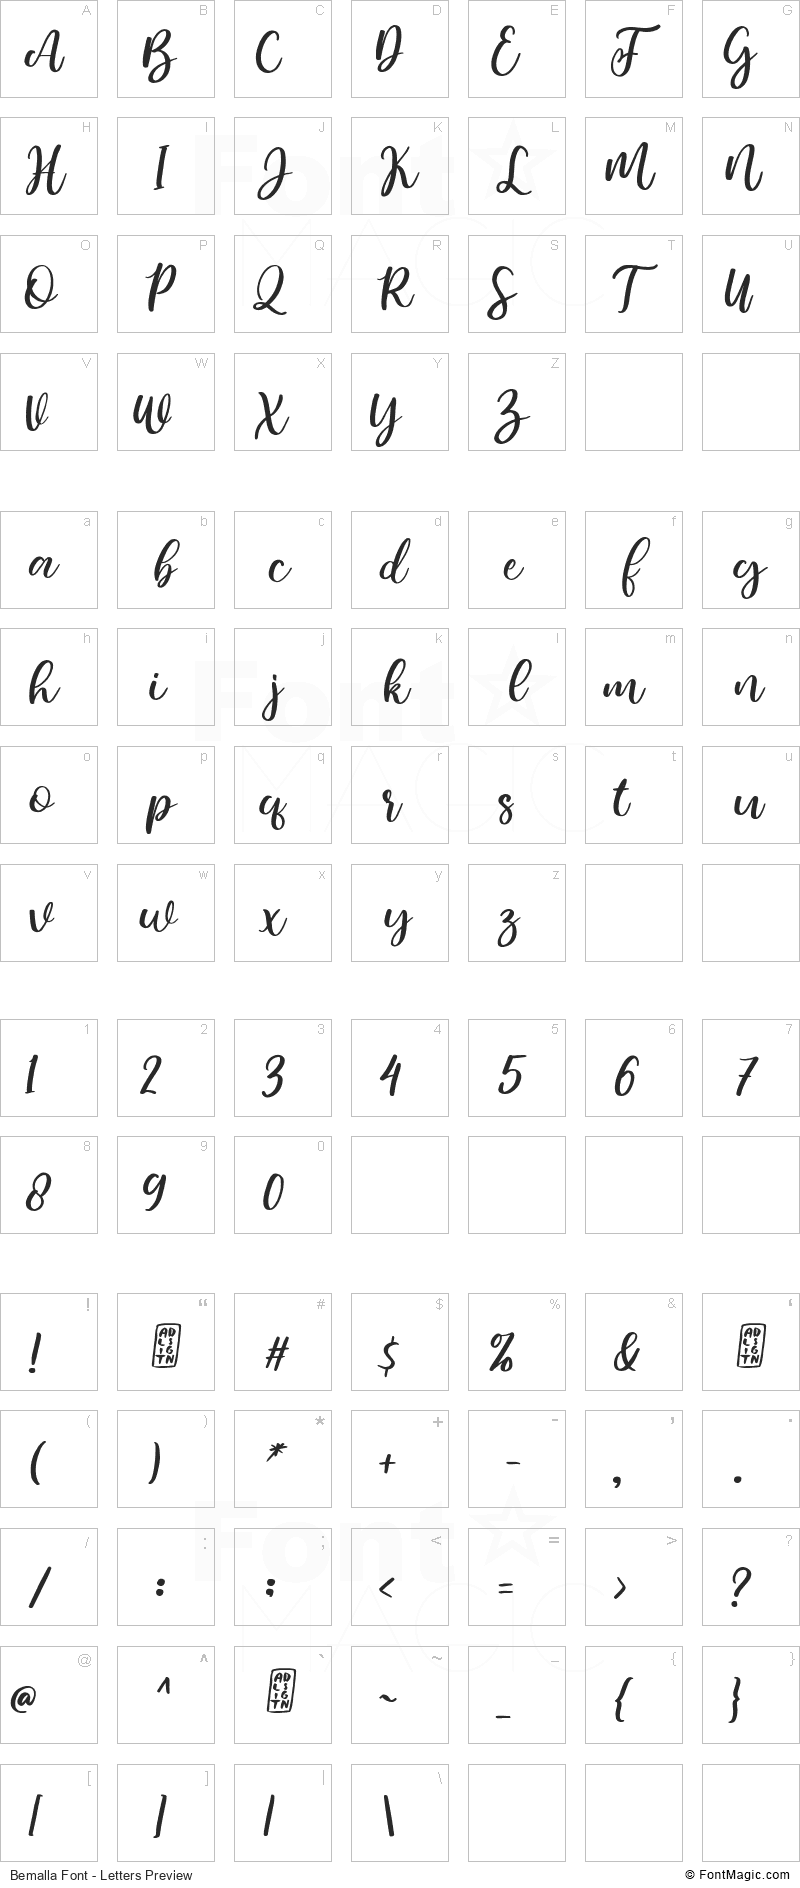 Bemalla Font - All Latters Preview Chart